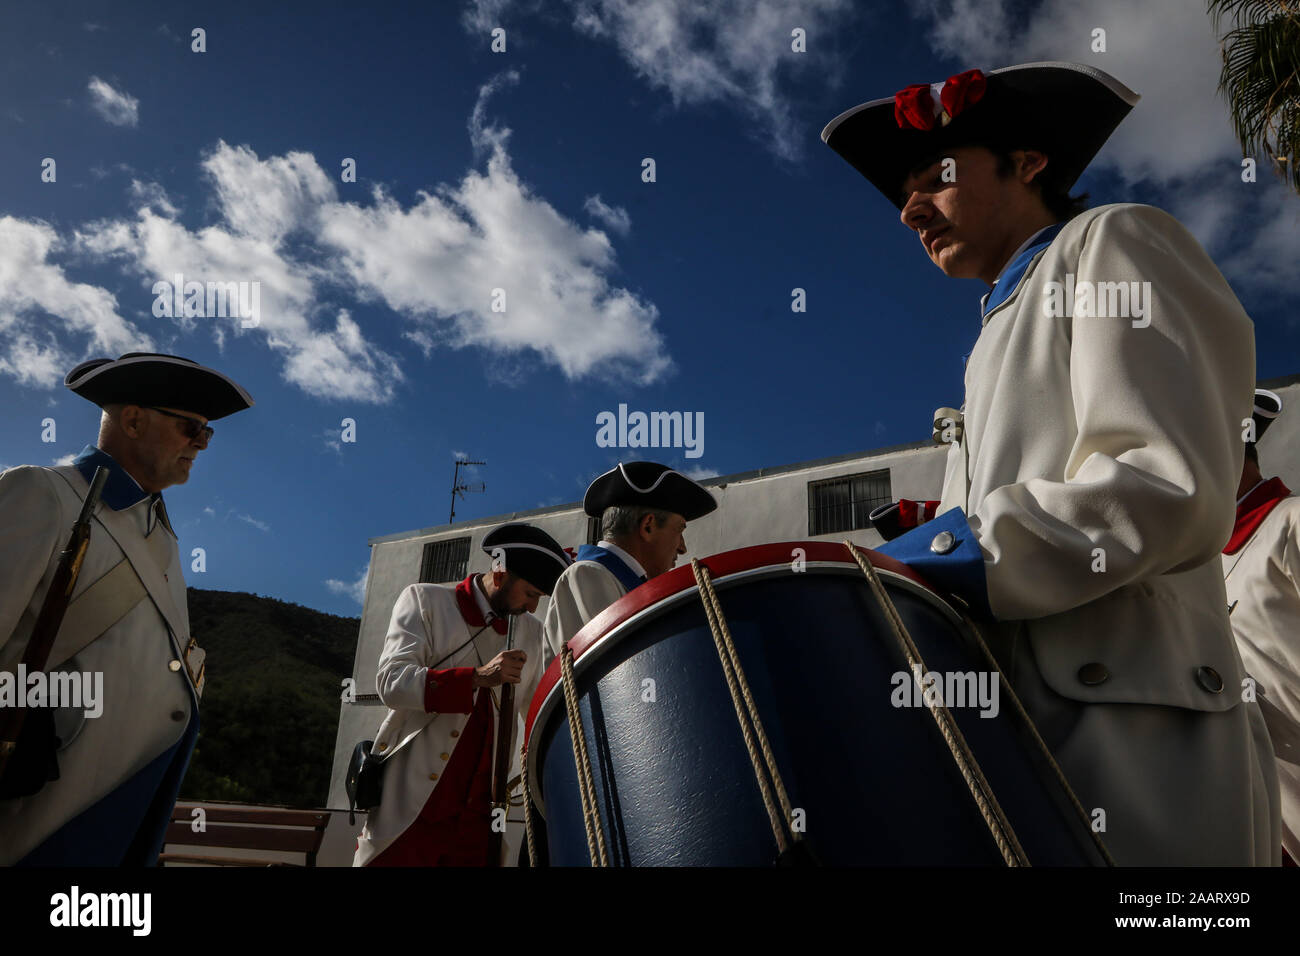 Malaga, Spain. 23rd Nov, 2019. The town council of Macharaviaya has twinned with the city of Galveston (texas) by the figure of Bernardo de GÃ¡lvez that has played such an important role in the history of Spain and the United States Credit: Lorenzo Carnero/ZUMA Wire/Alamy Live News Credit: ZUMA Press, Inc./Alamy Live News Stock Photo